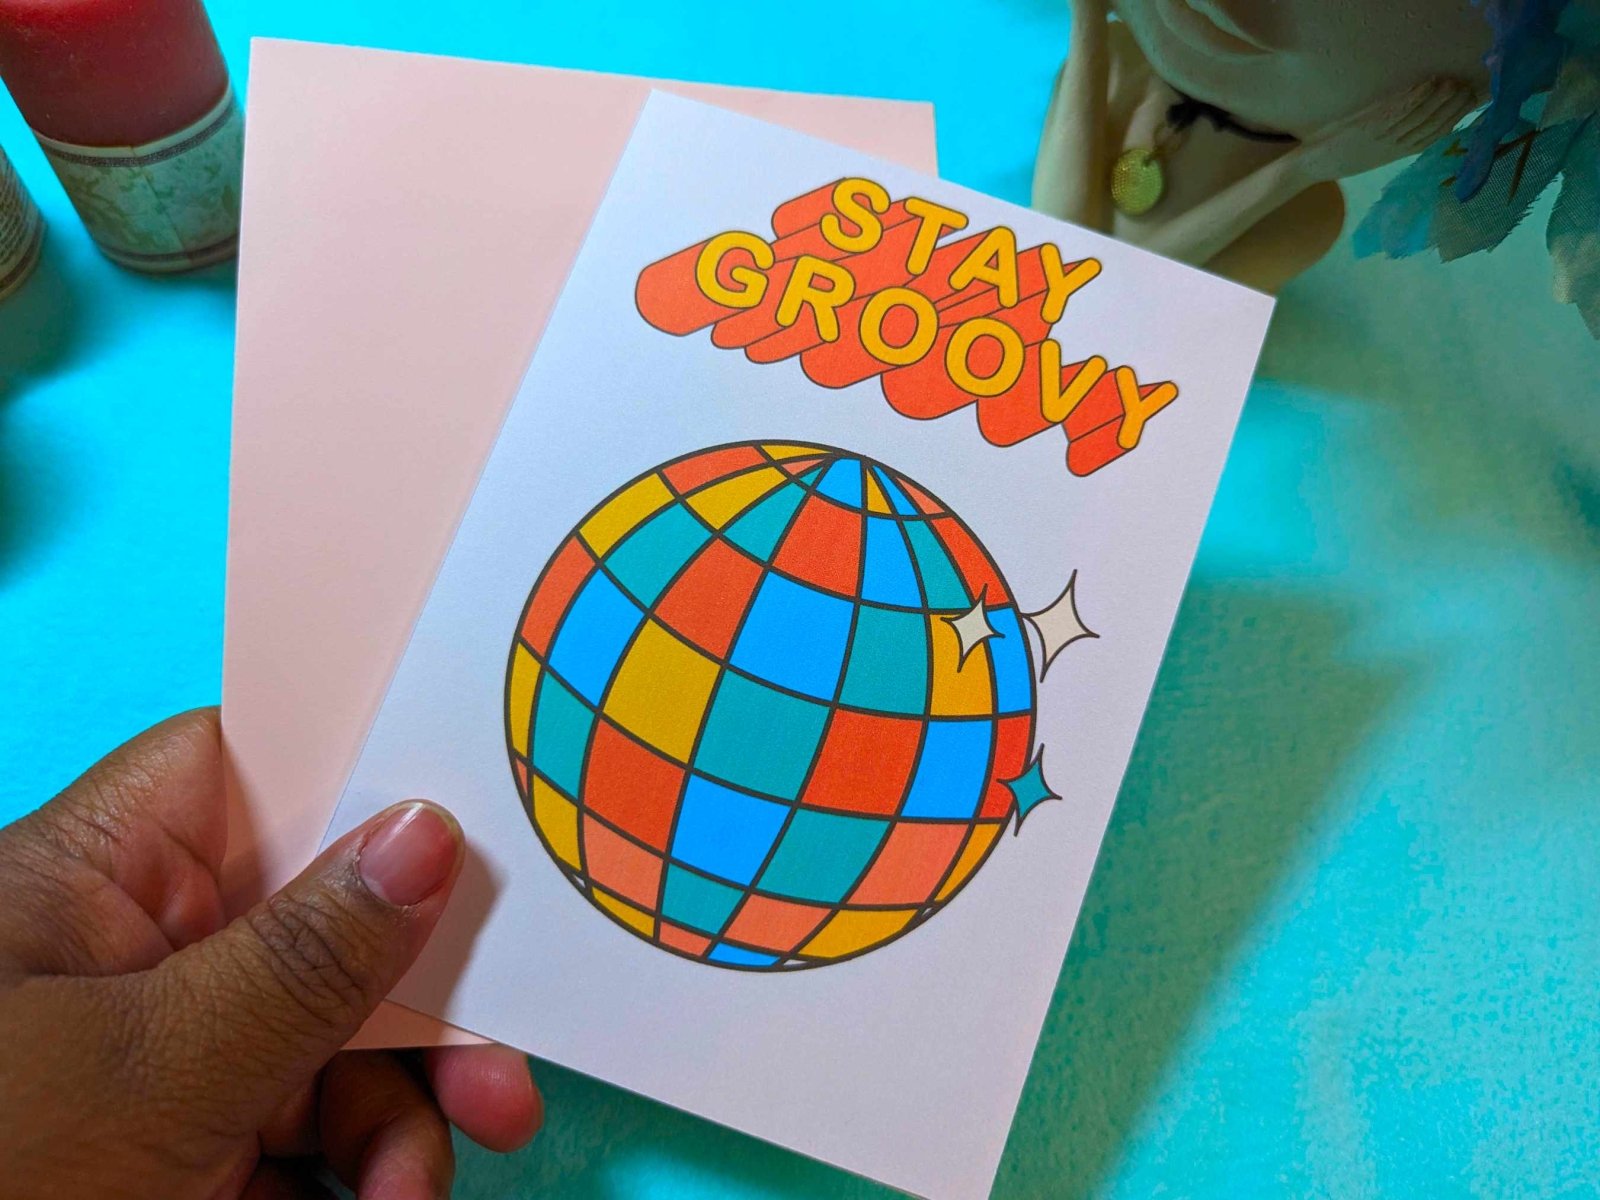 Stay Groovy Greeting Card - Greeting Cards - UpperRoomPrints